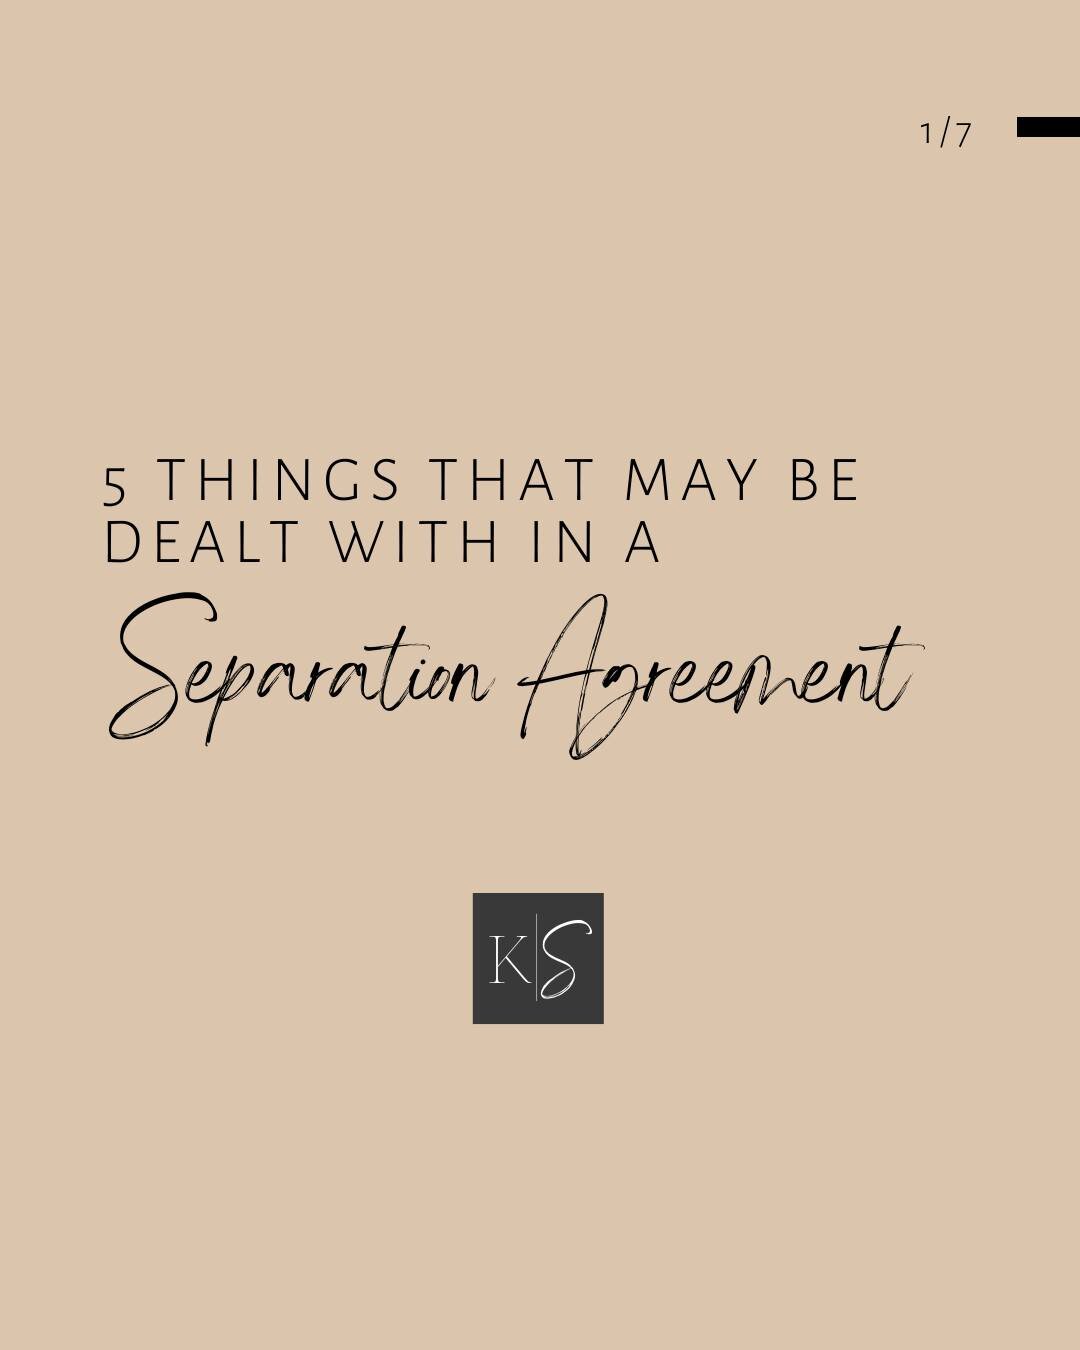 A separation agreement can help couples navigate the complexities of separation and divorce by addressing important issues such as property division, parenting time and child support, spousal support, insurance and healthcare, and tax matters.

#oned